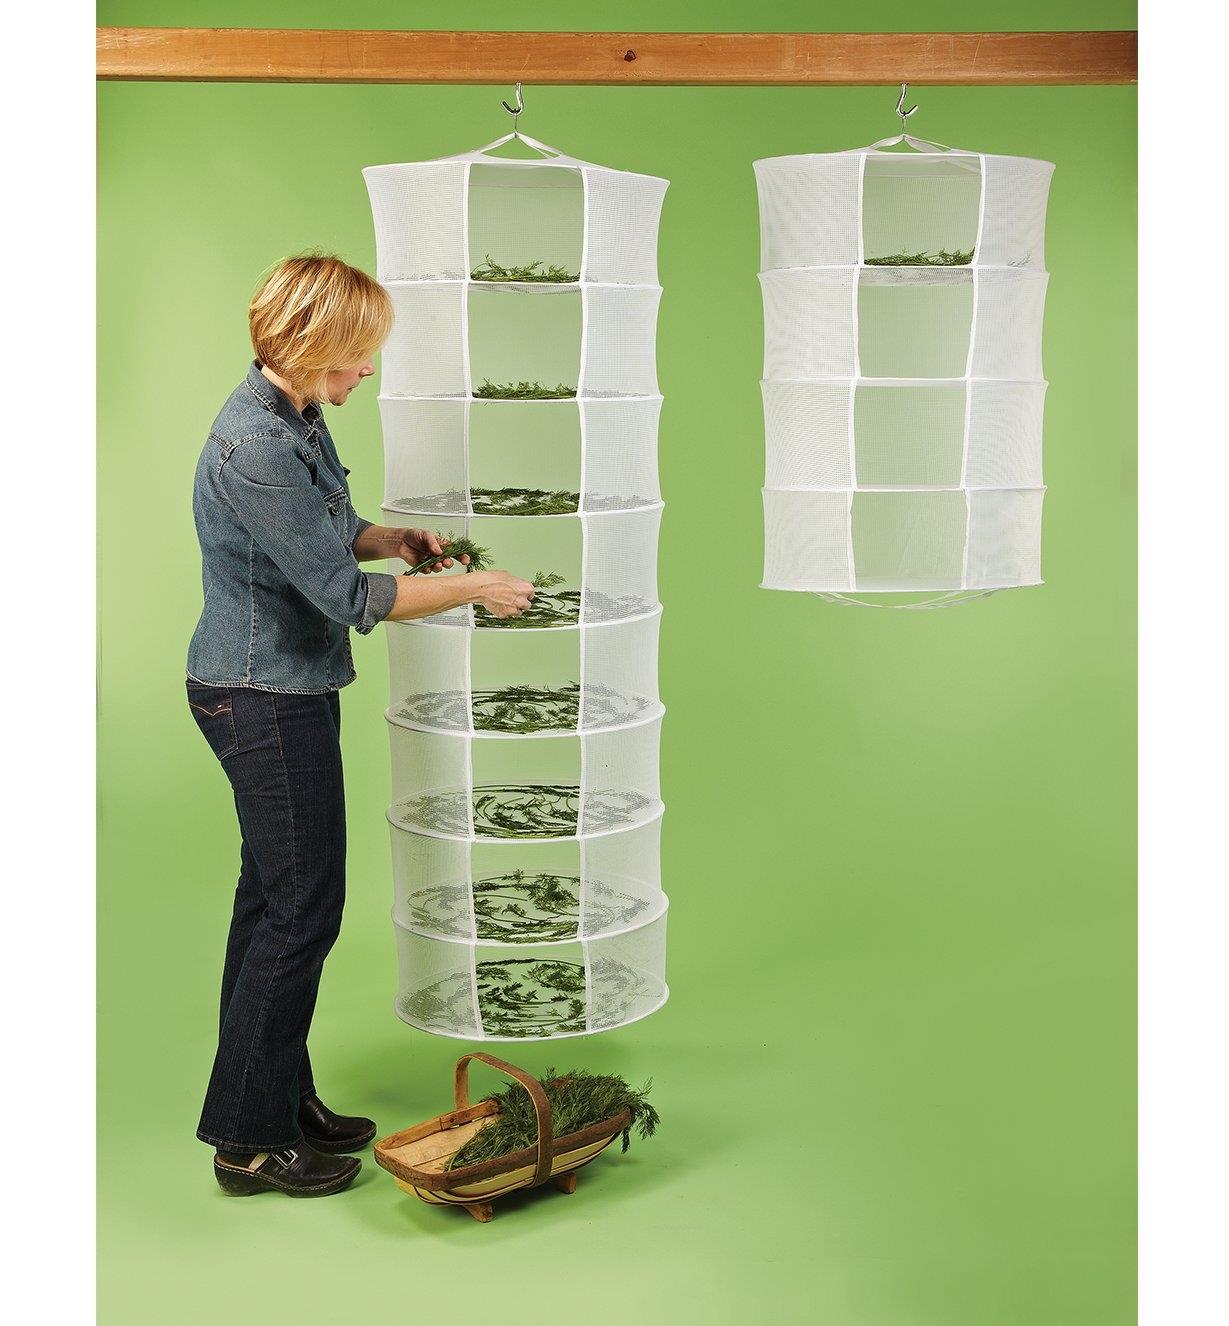 A woman places herbs on the shelves of an eight-tier Herb Dryer